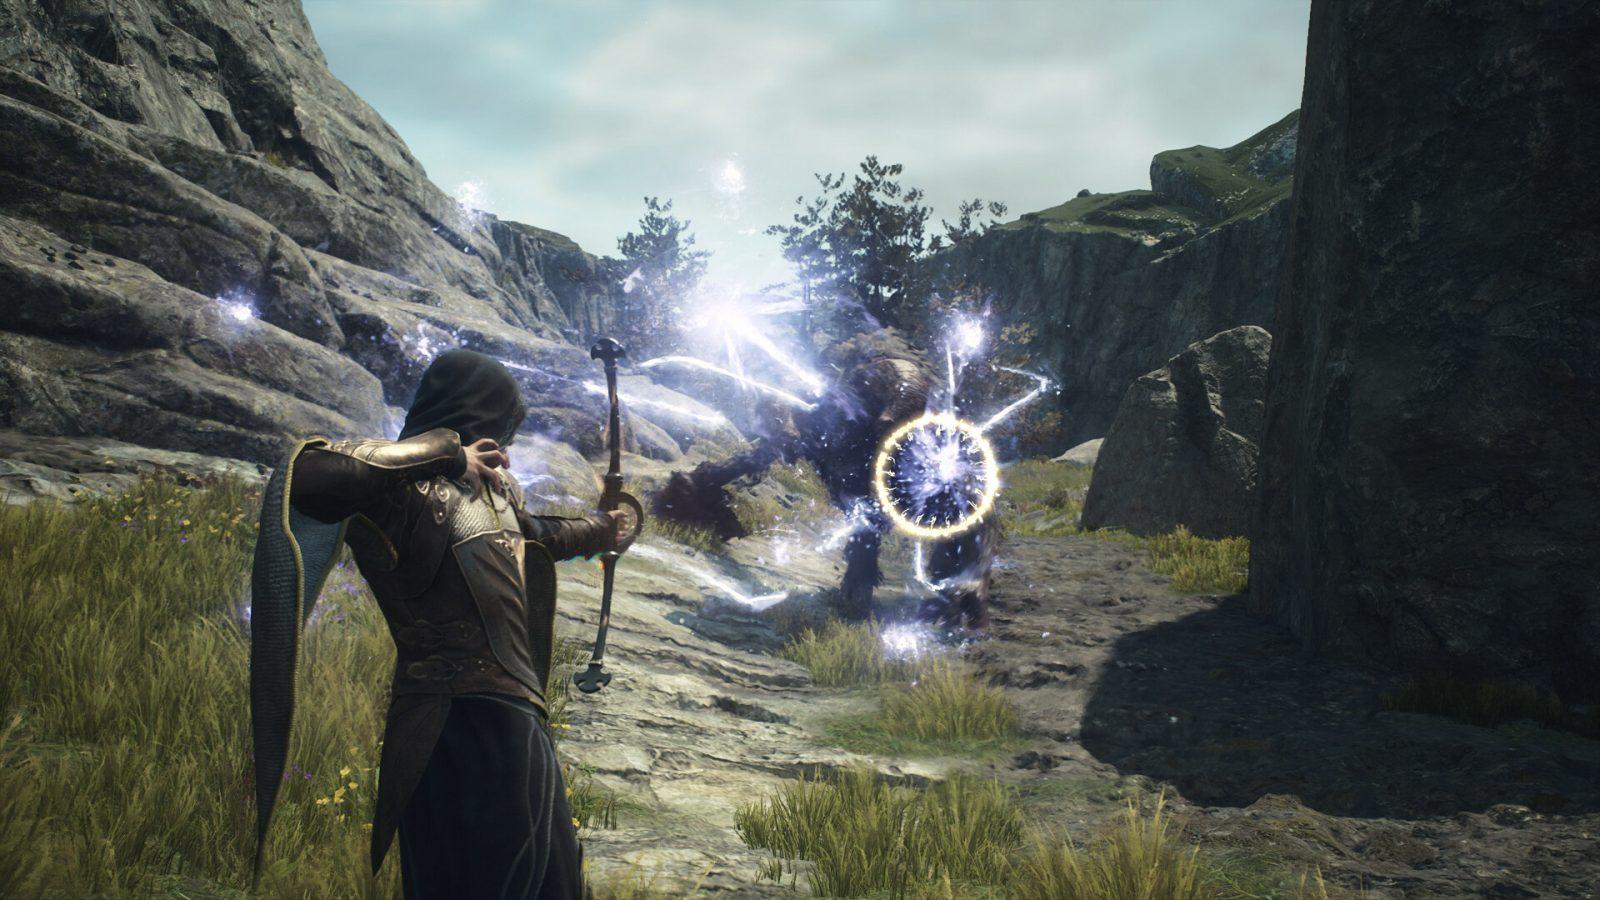 A screenshot from the game Dragon's Dogma 2